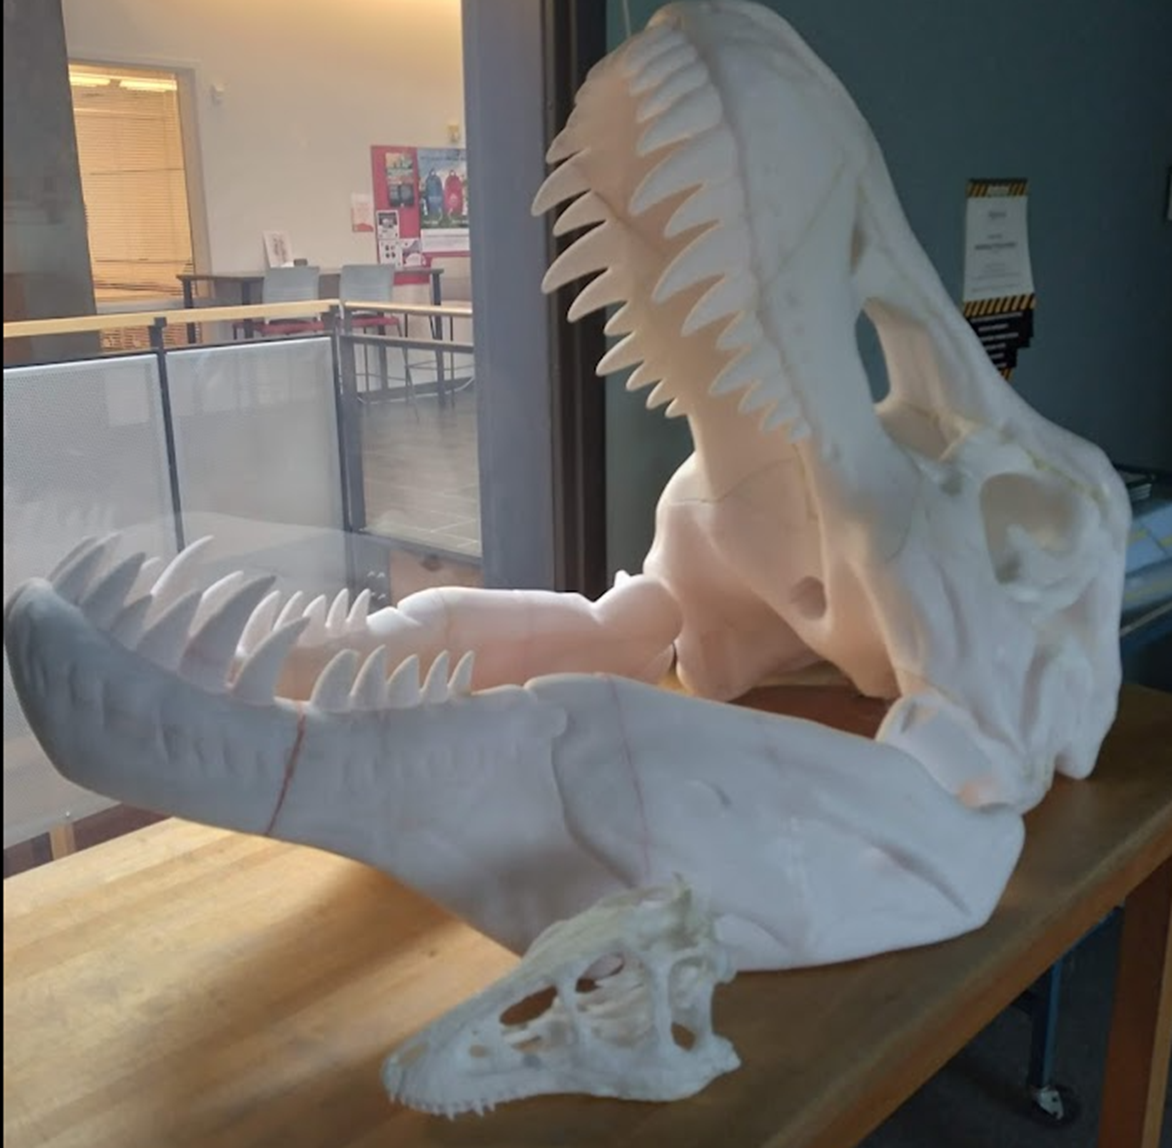 Giant T-Rex skull 3D Printed and on display in MakerSpace.